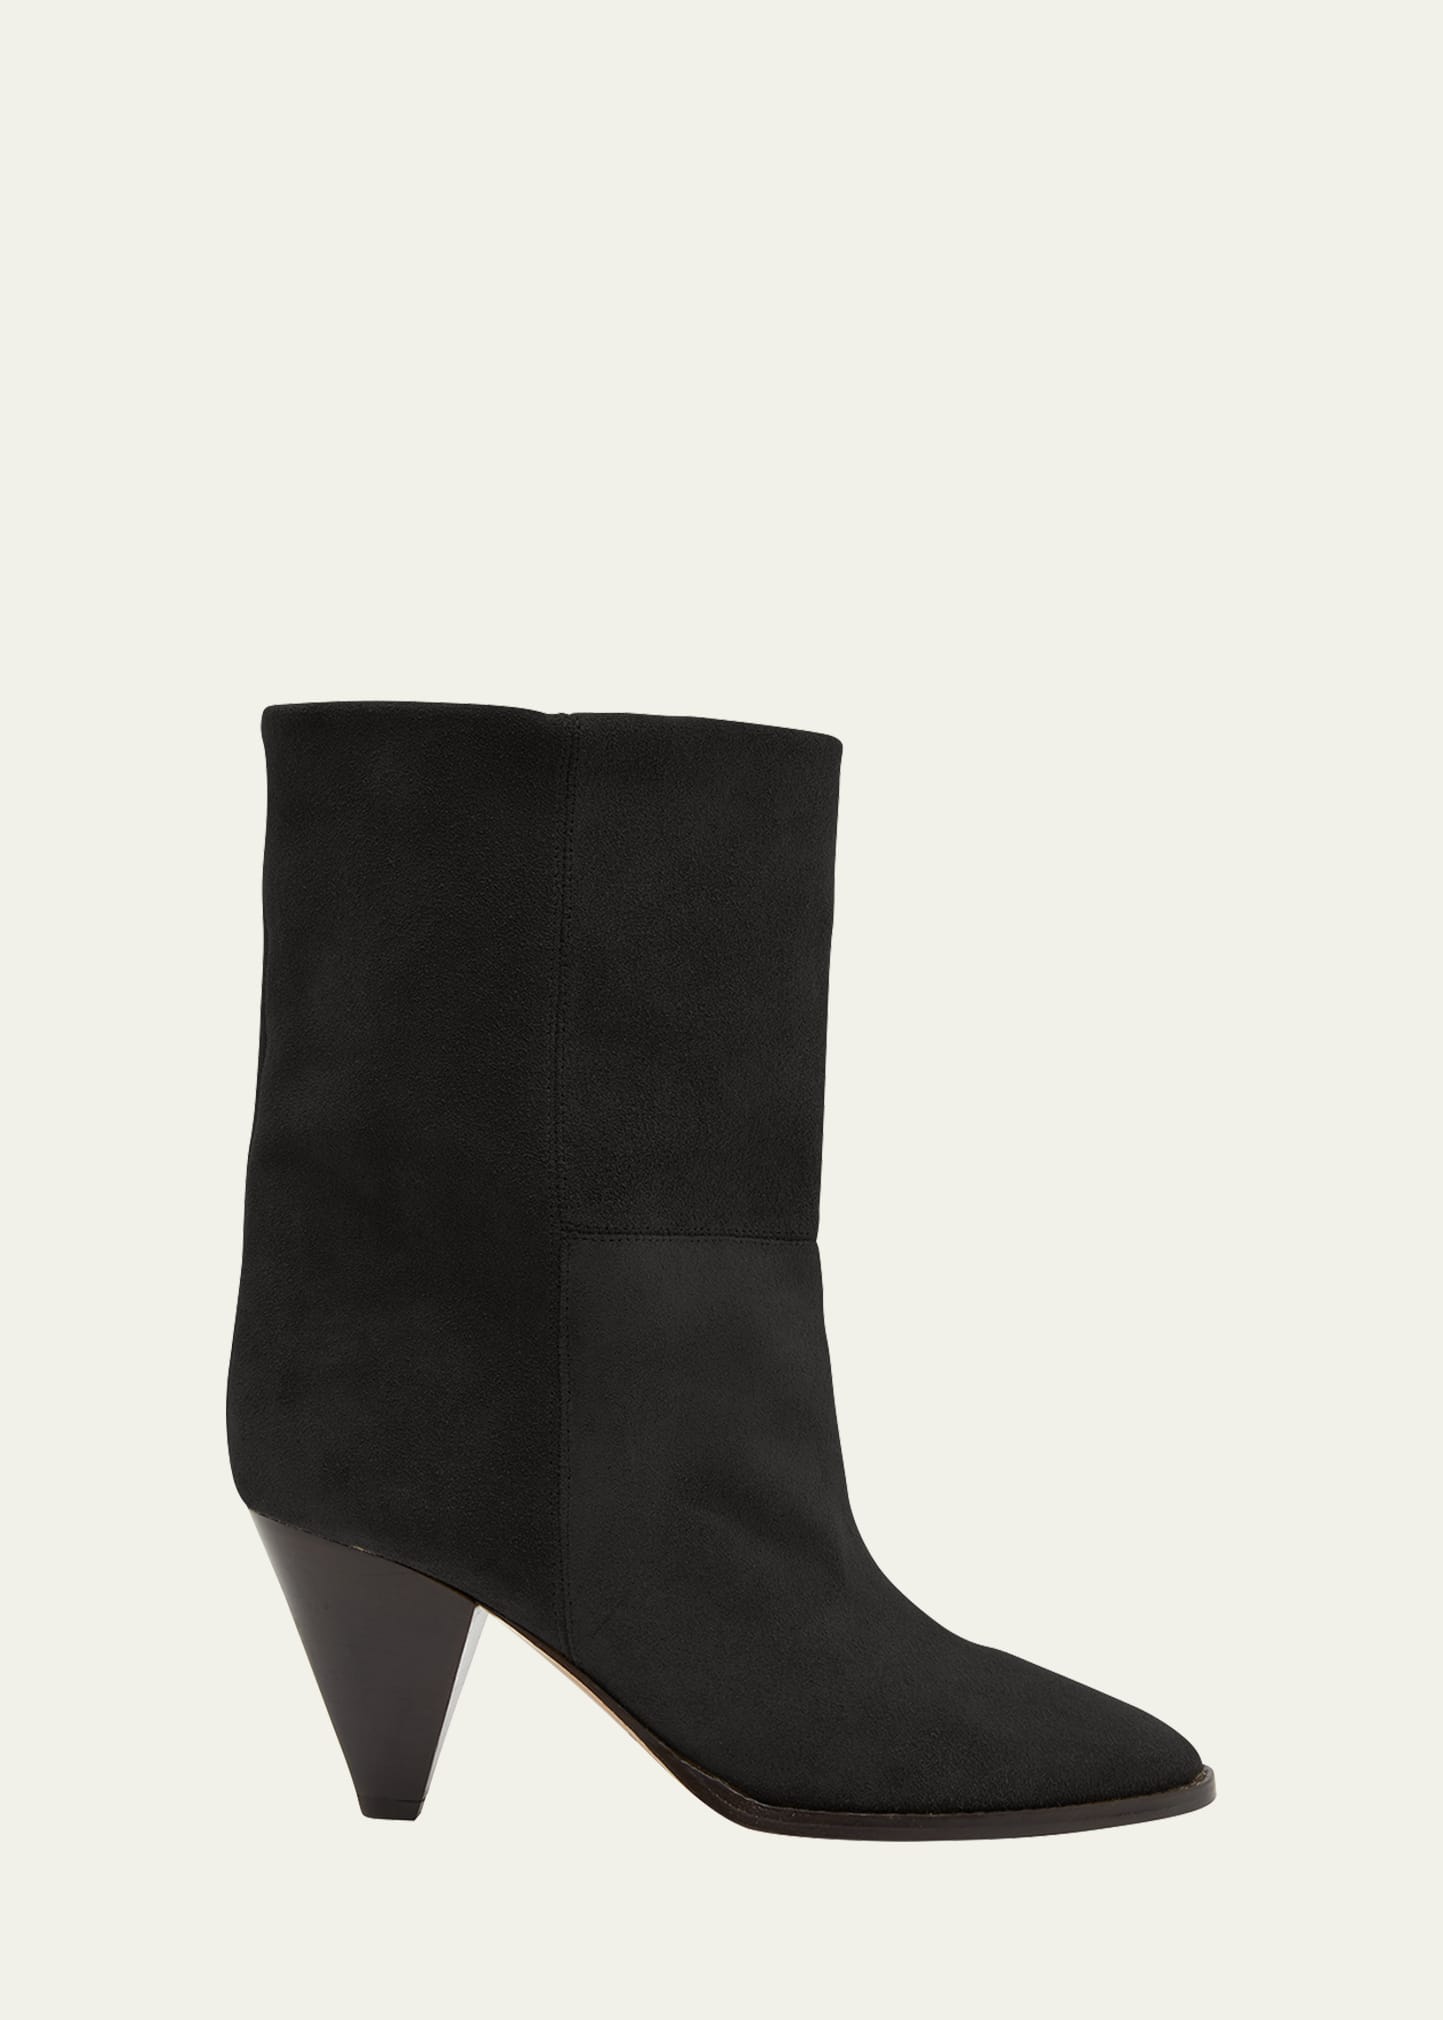 Isabel Marant Rouxa Suede Ankle Booties In Black